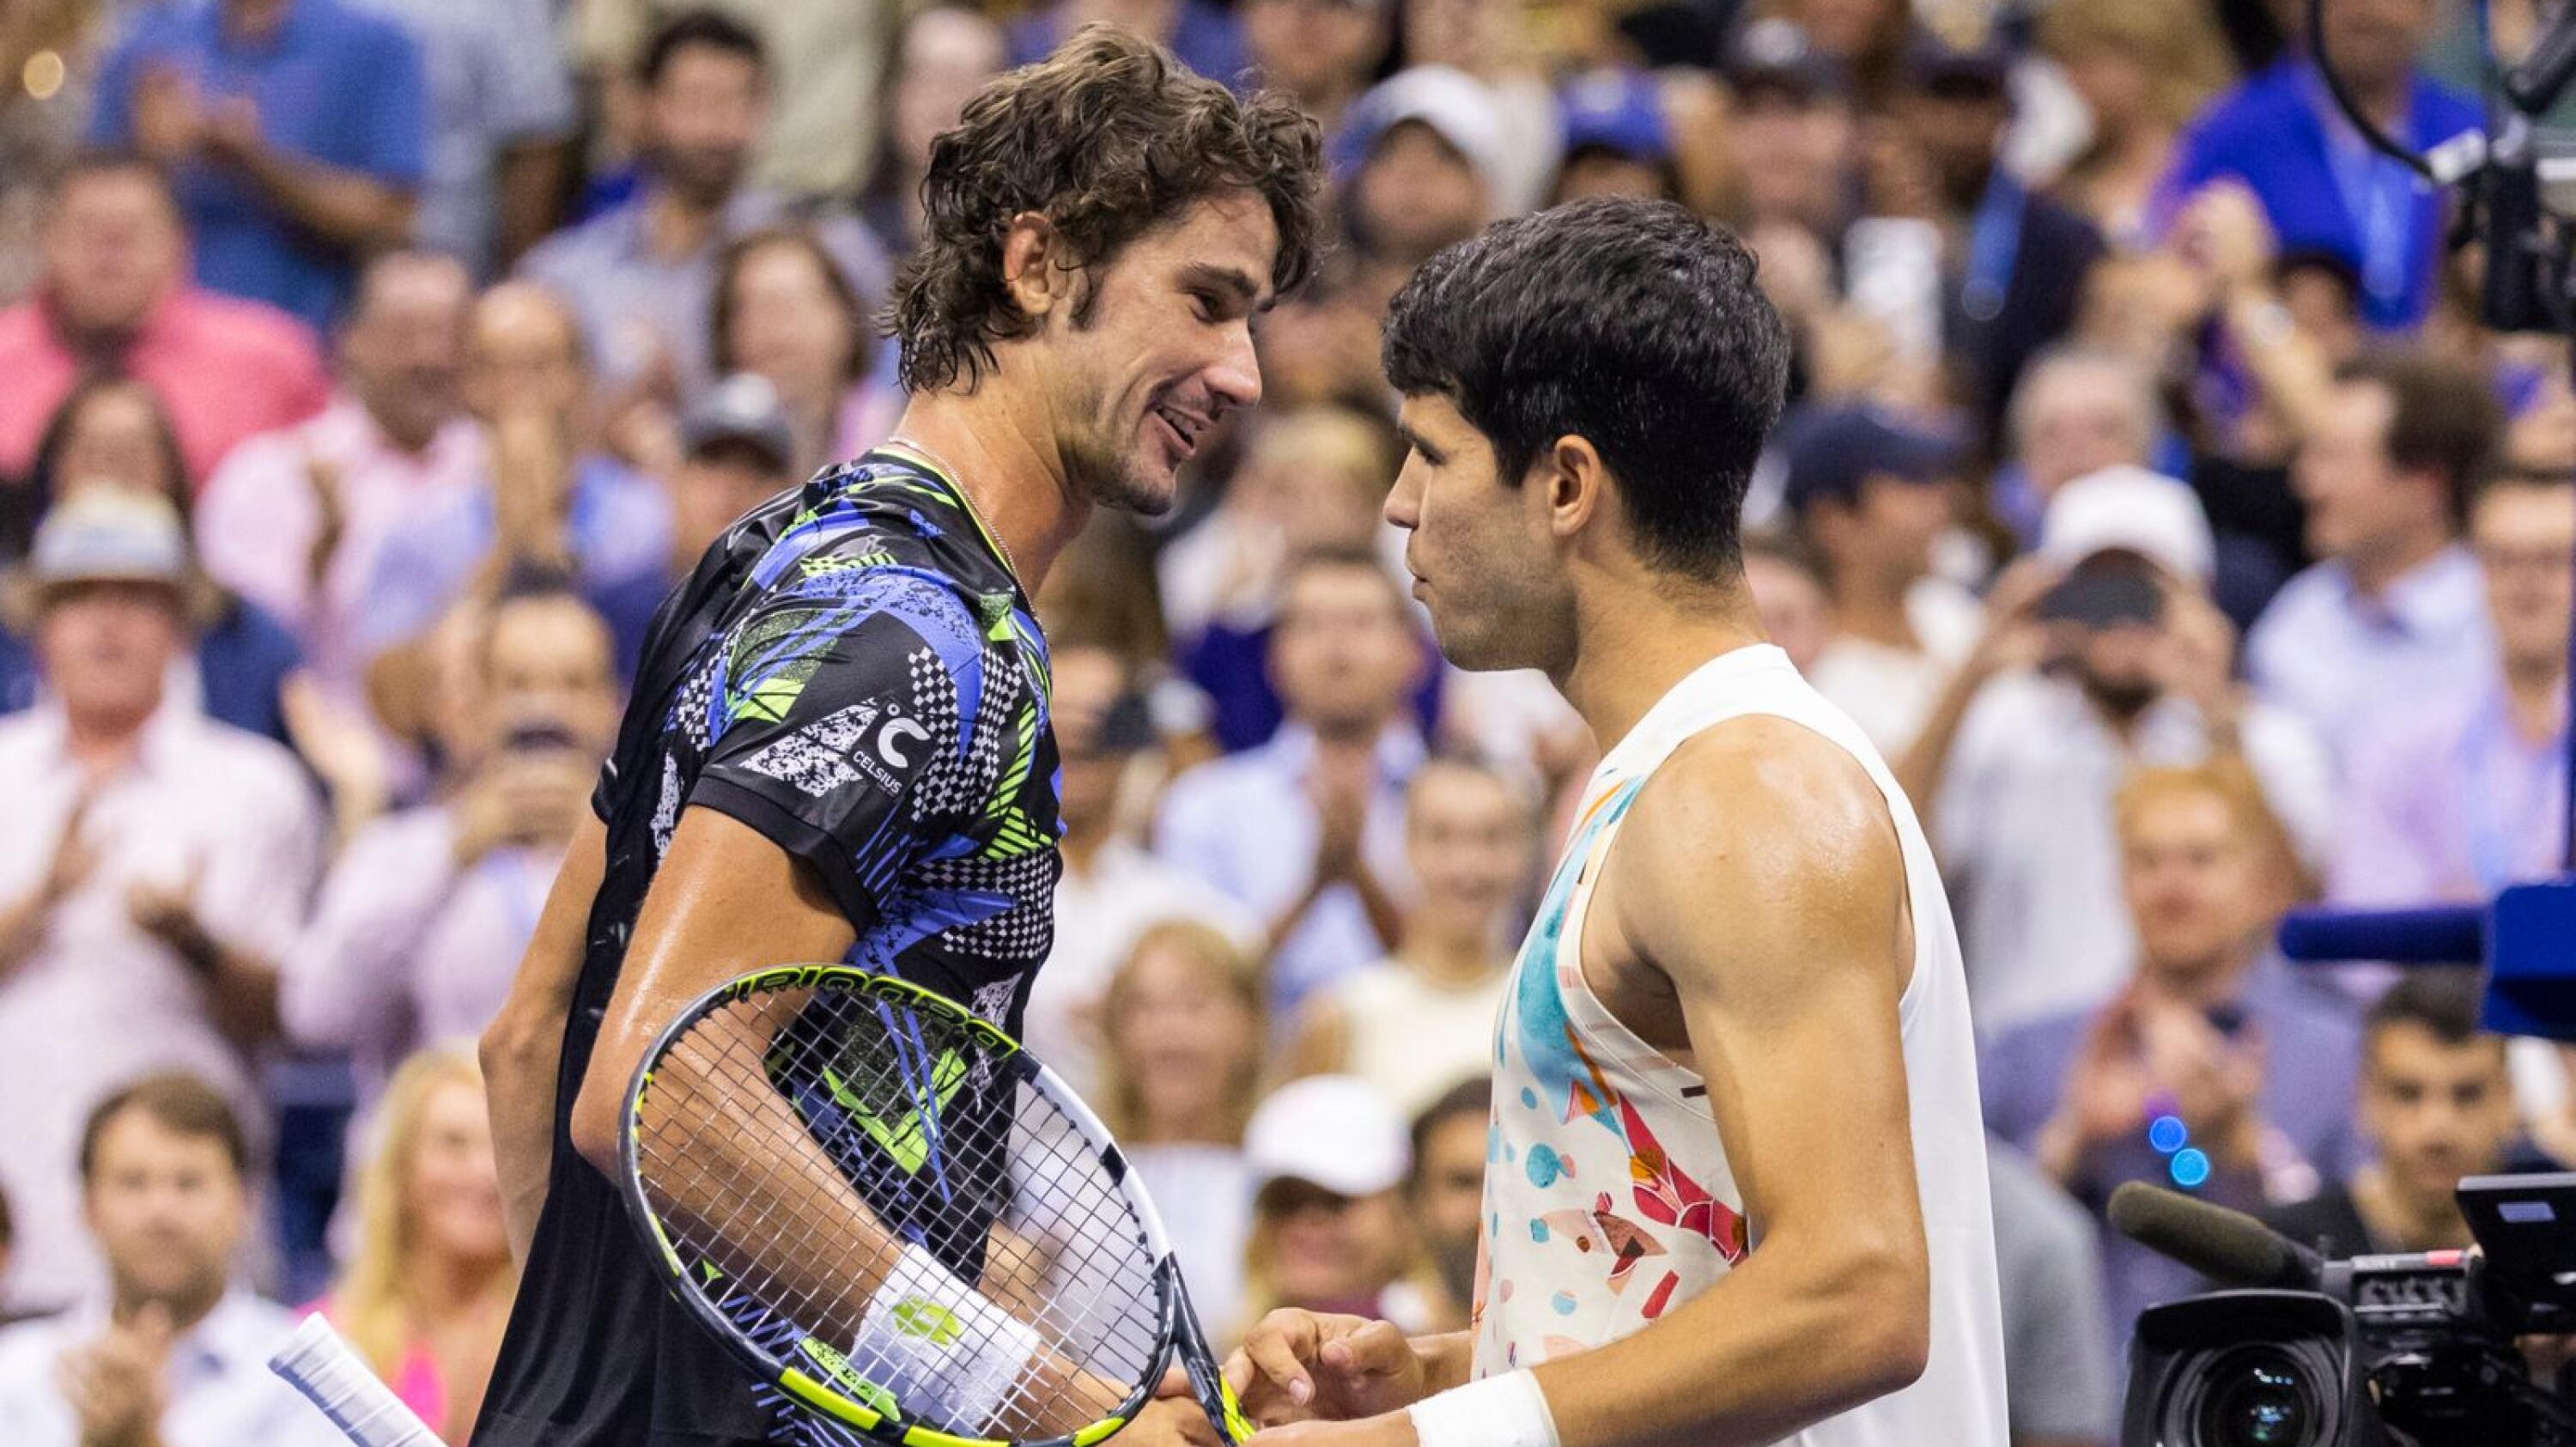 Spain's Carlos Alcaraz (R) shakes hands with South Africa's Lloyd Harris after winning their US Open tennis tournament men's singles second round match at the USTA Billie Jean King National Tennis Center in New York City